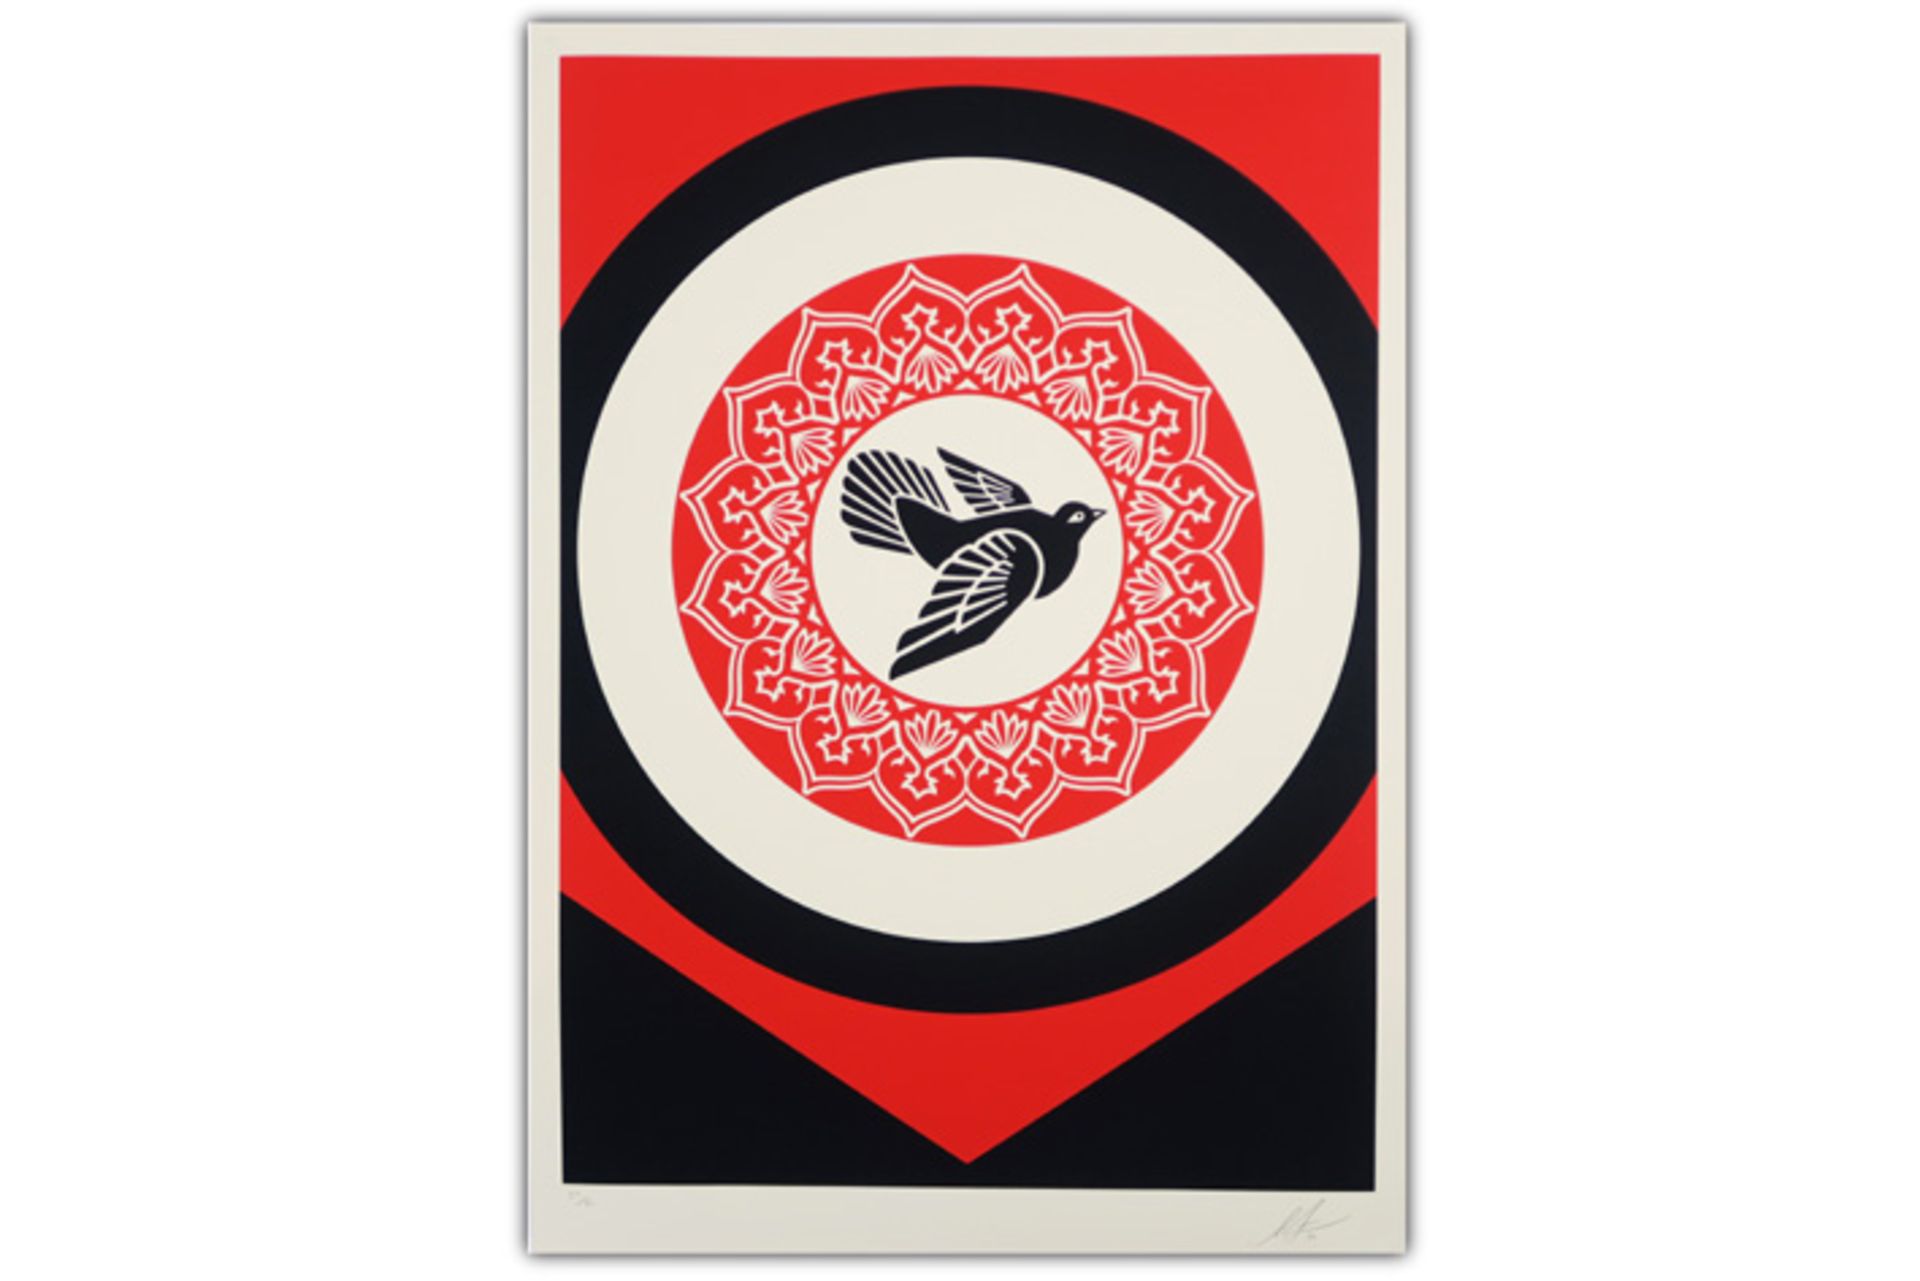 OBEY signed "Rise from the Ashes" screenprint with ashes from Iraqi Kurdistan - dated 2020 ||